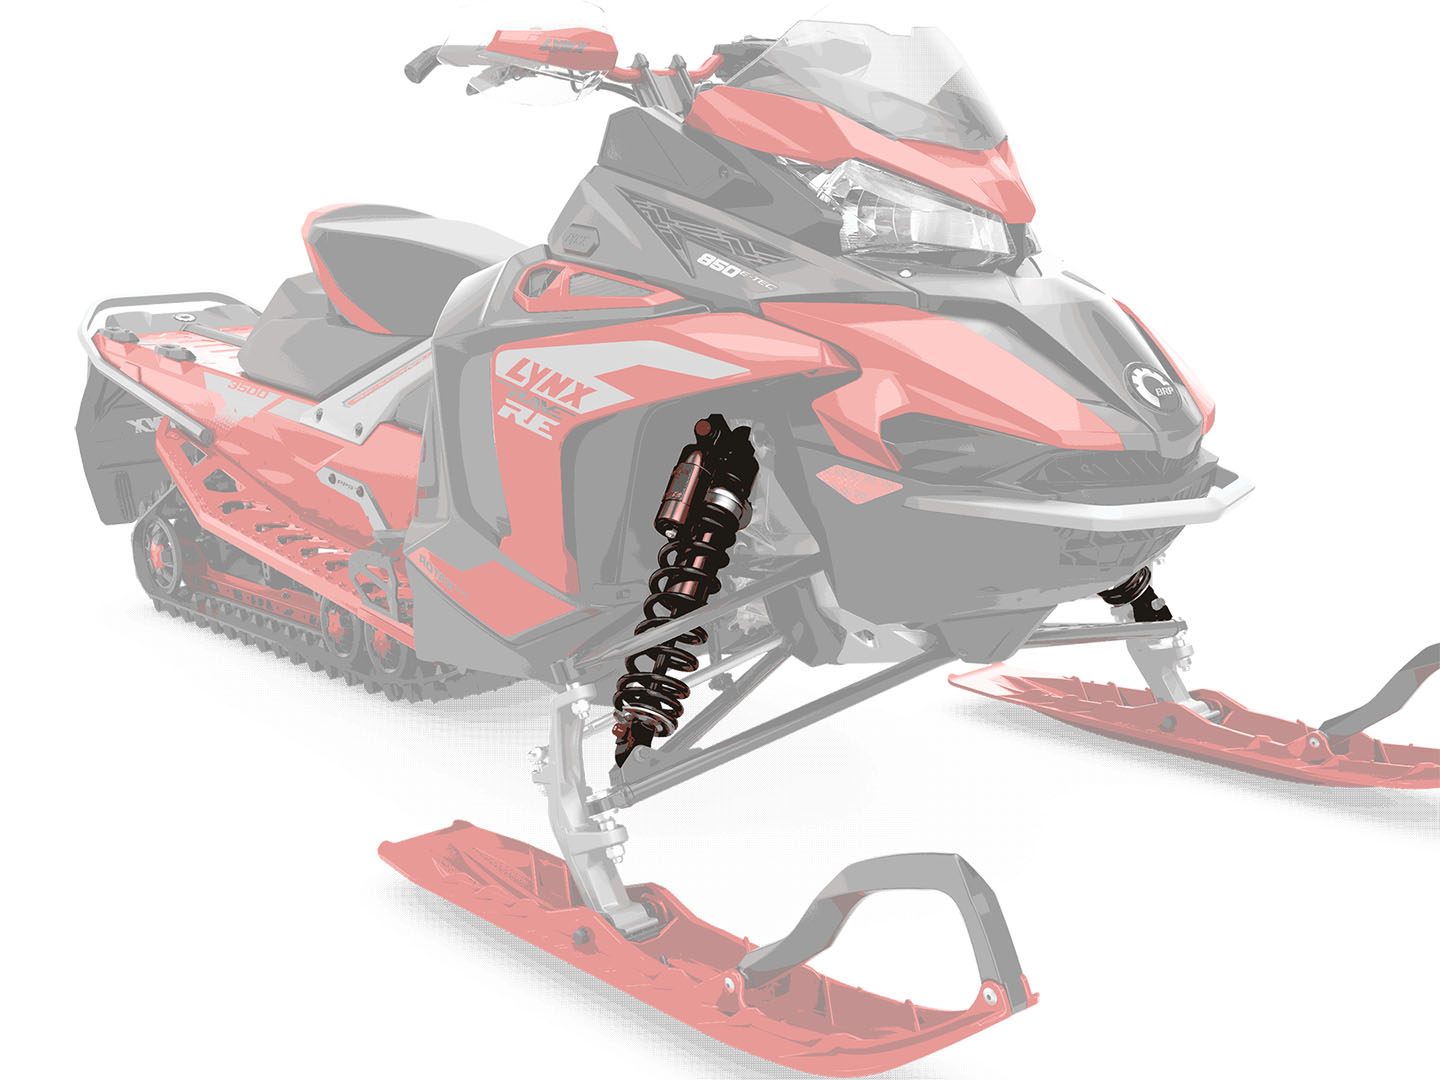 MORE STABILITY: LFS+ front suspension - The new LFS+ front suspension features more suspension travel and wider, 1097 mm ski stance, providing the Lynx Rave sport snowmobile with improved control and flatter cornering capability. - Photo 9